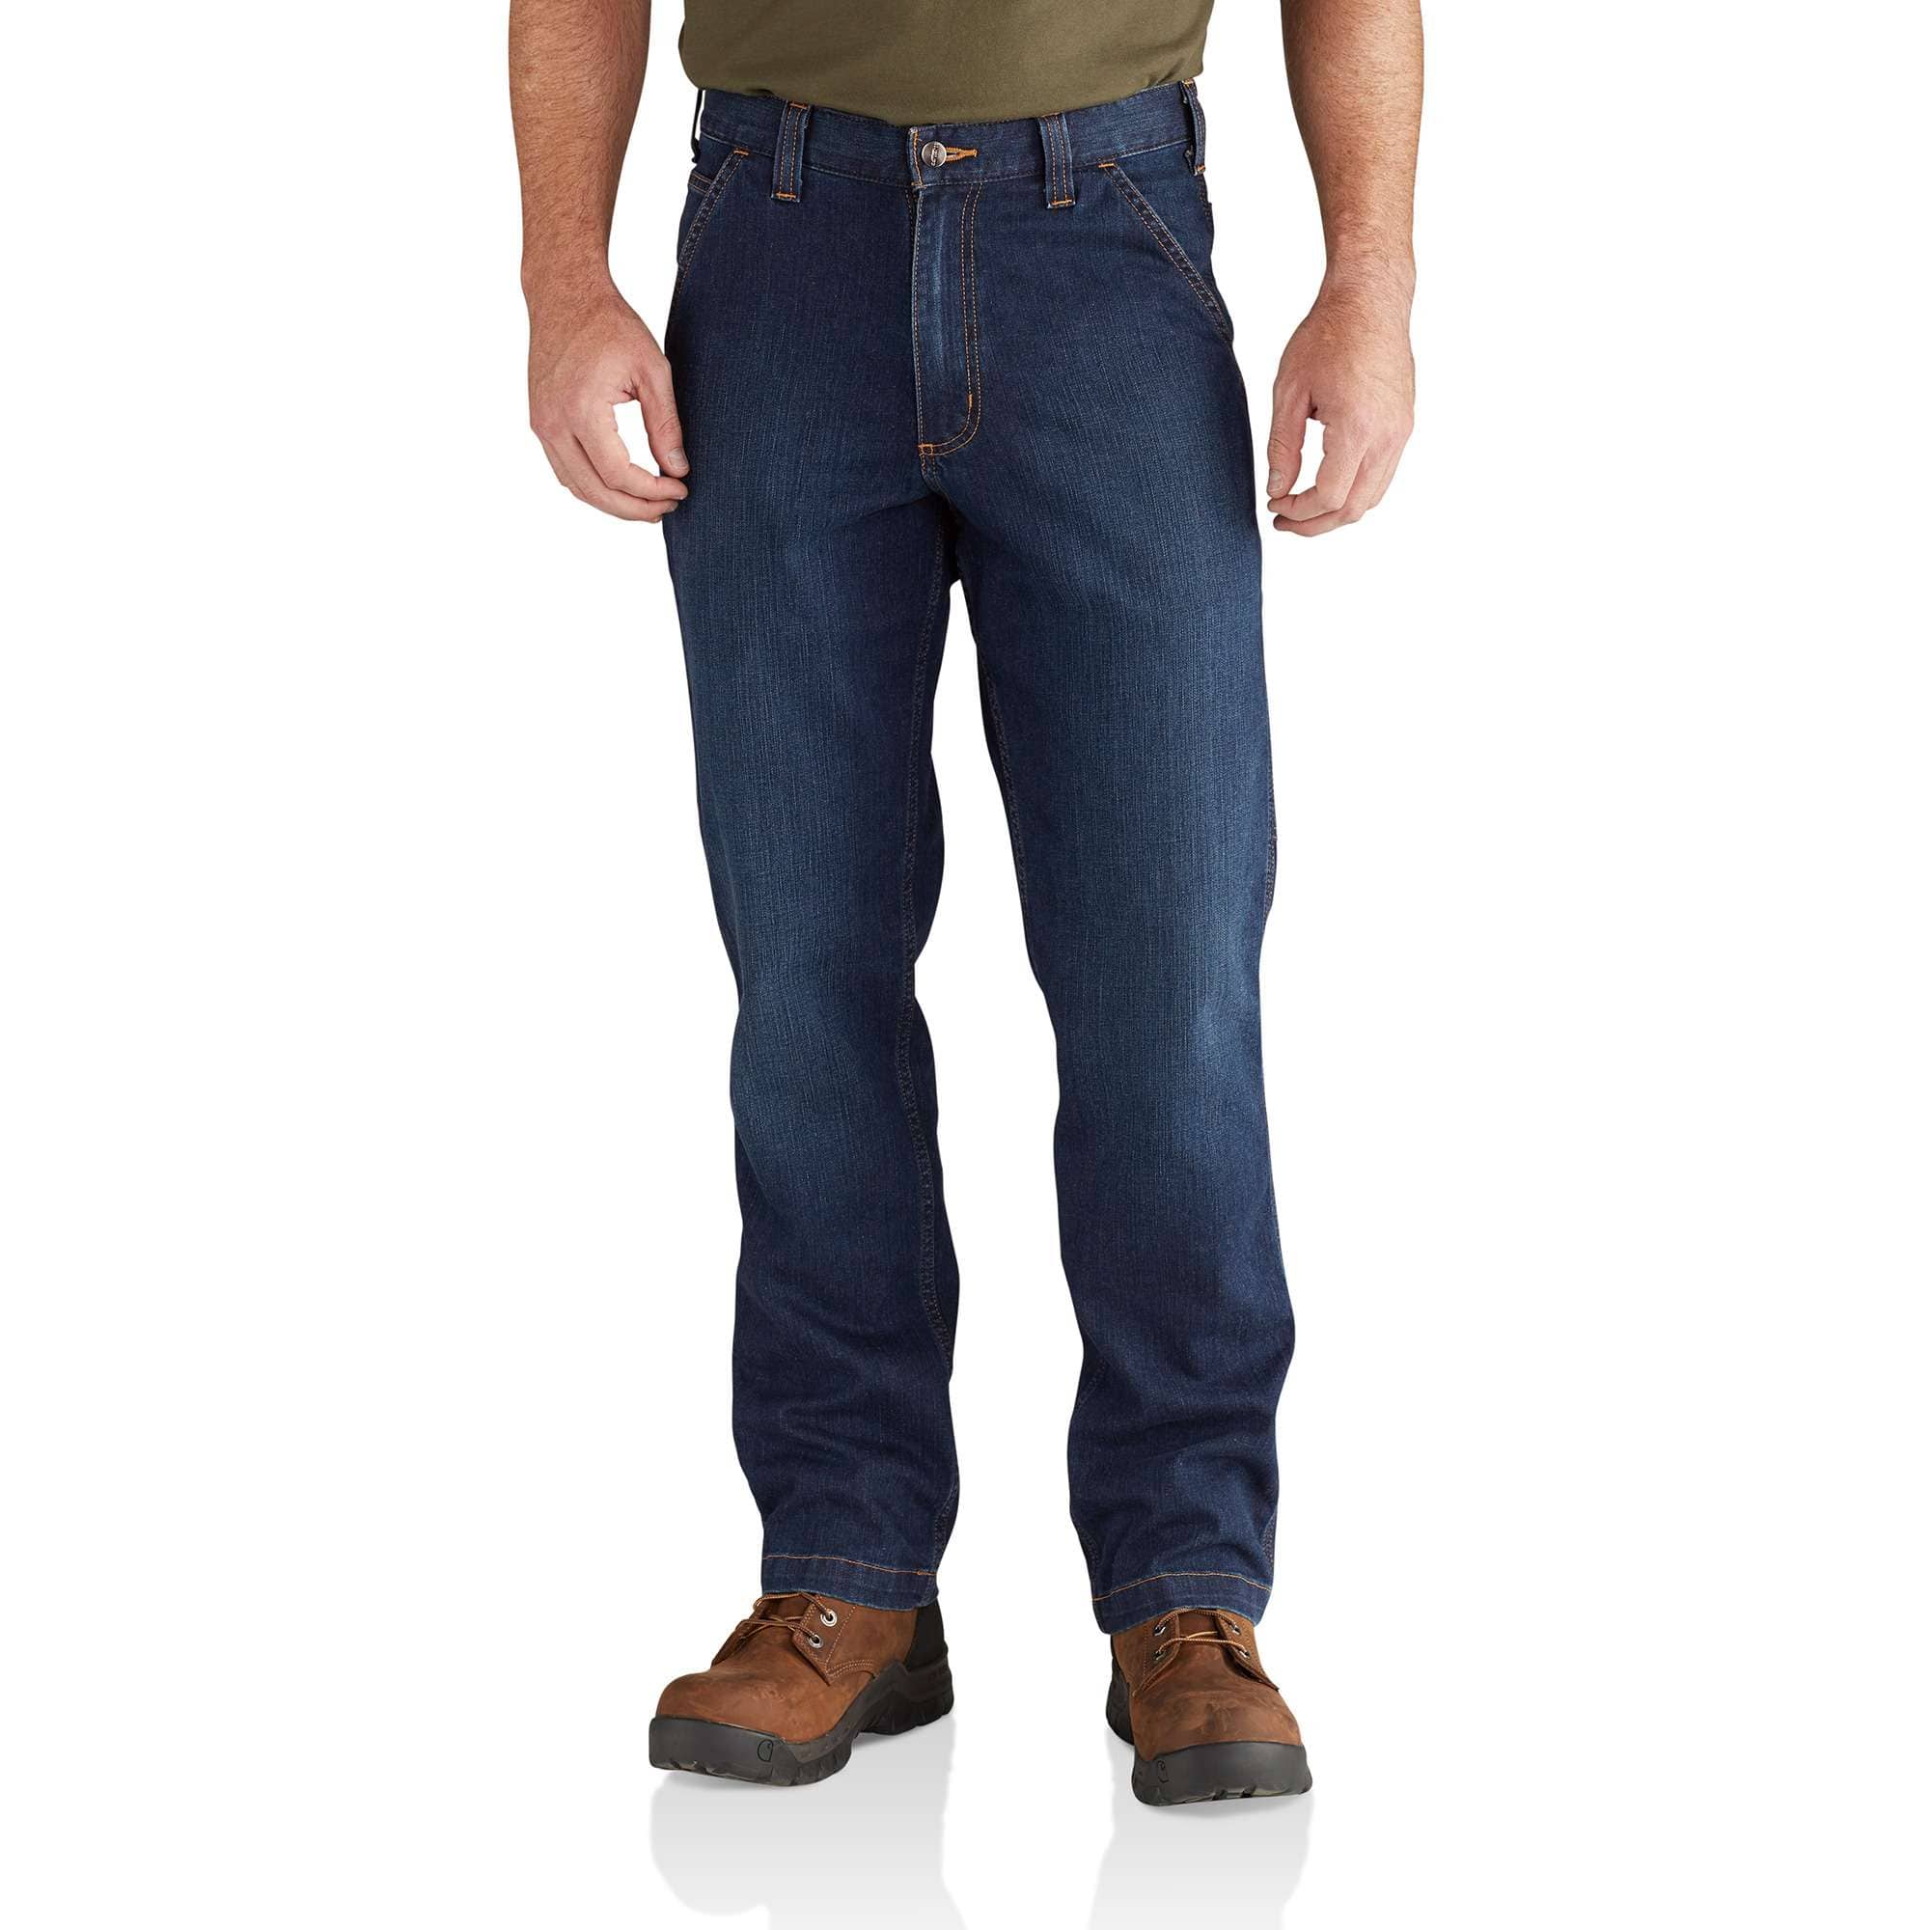 Buy BD2808 M RF RlxdFit Utly Jean - Carhartt Online at Best price - MD